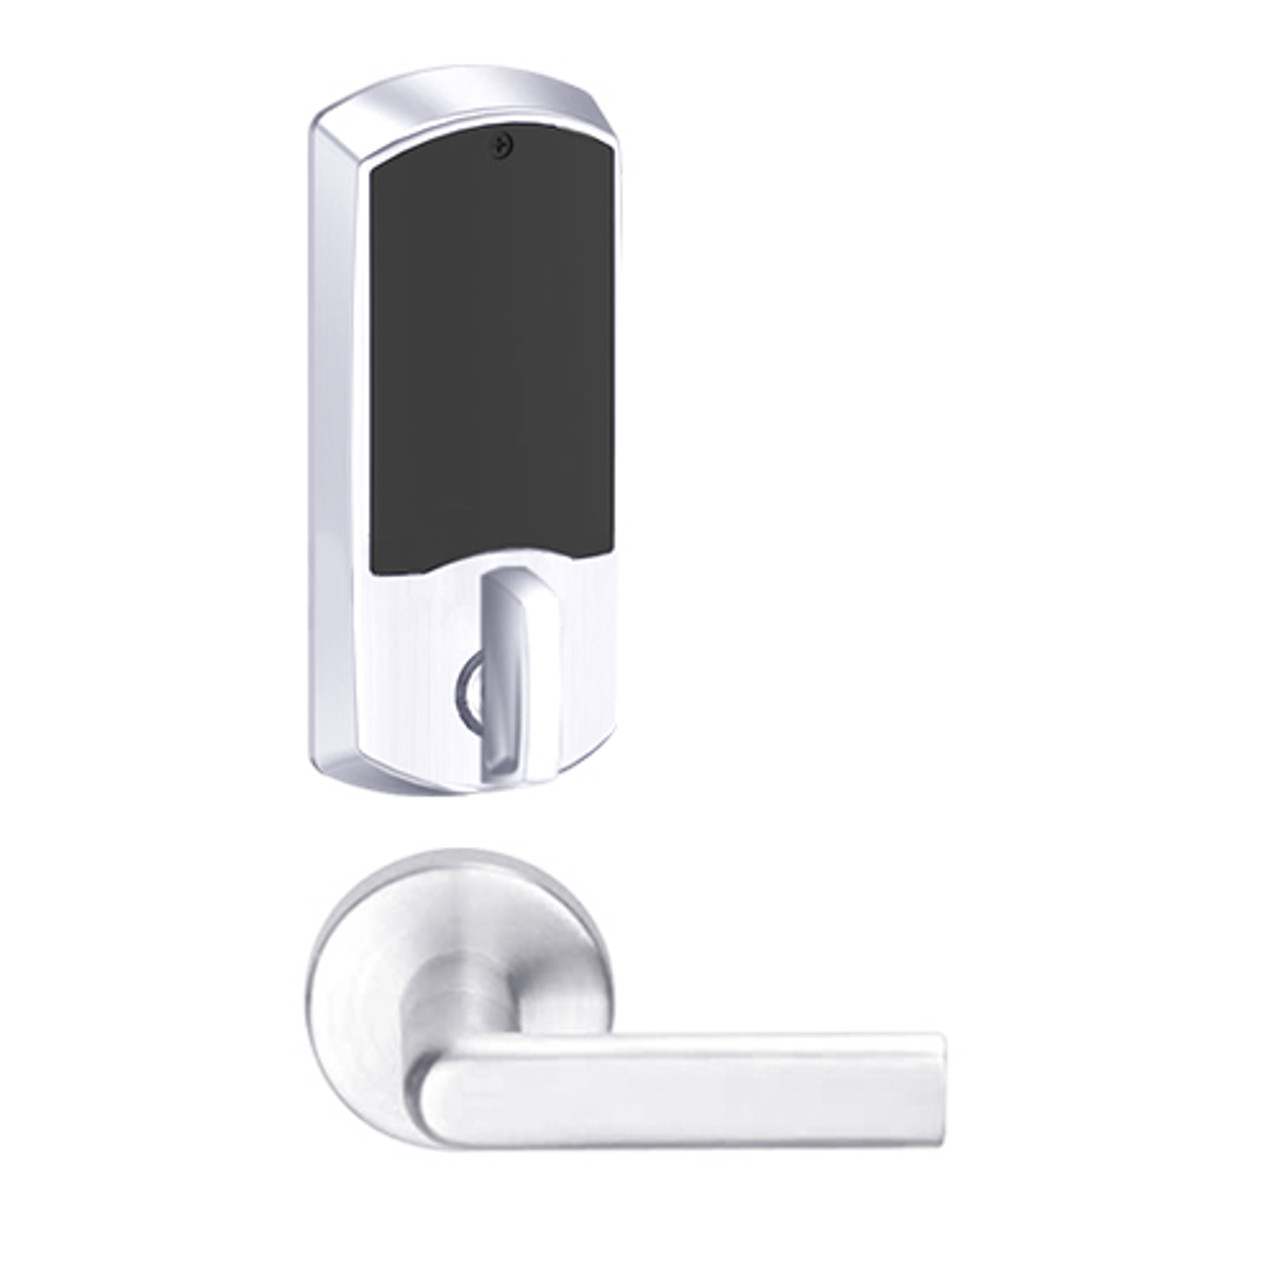 LEMD-GRW-P-01-625-00B Schlage Privacy/Apartment Wireless Greenwich Mortise Deadbolt Lock with LED and 01 Lever in Bright Chrome